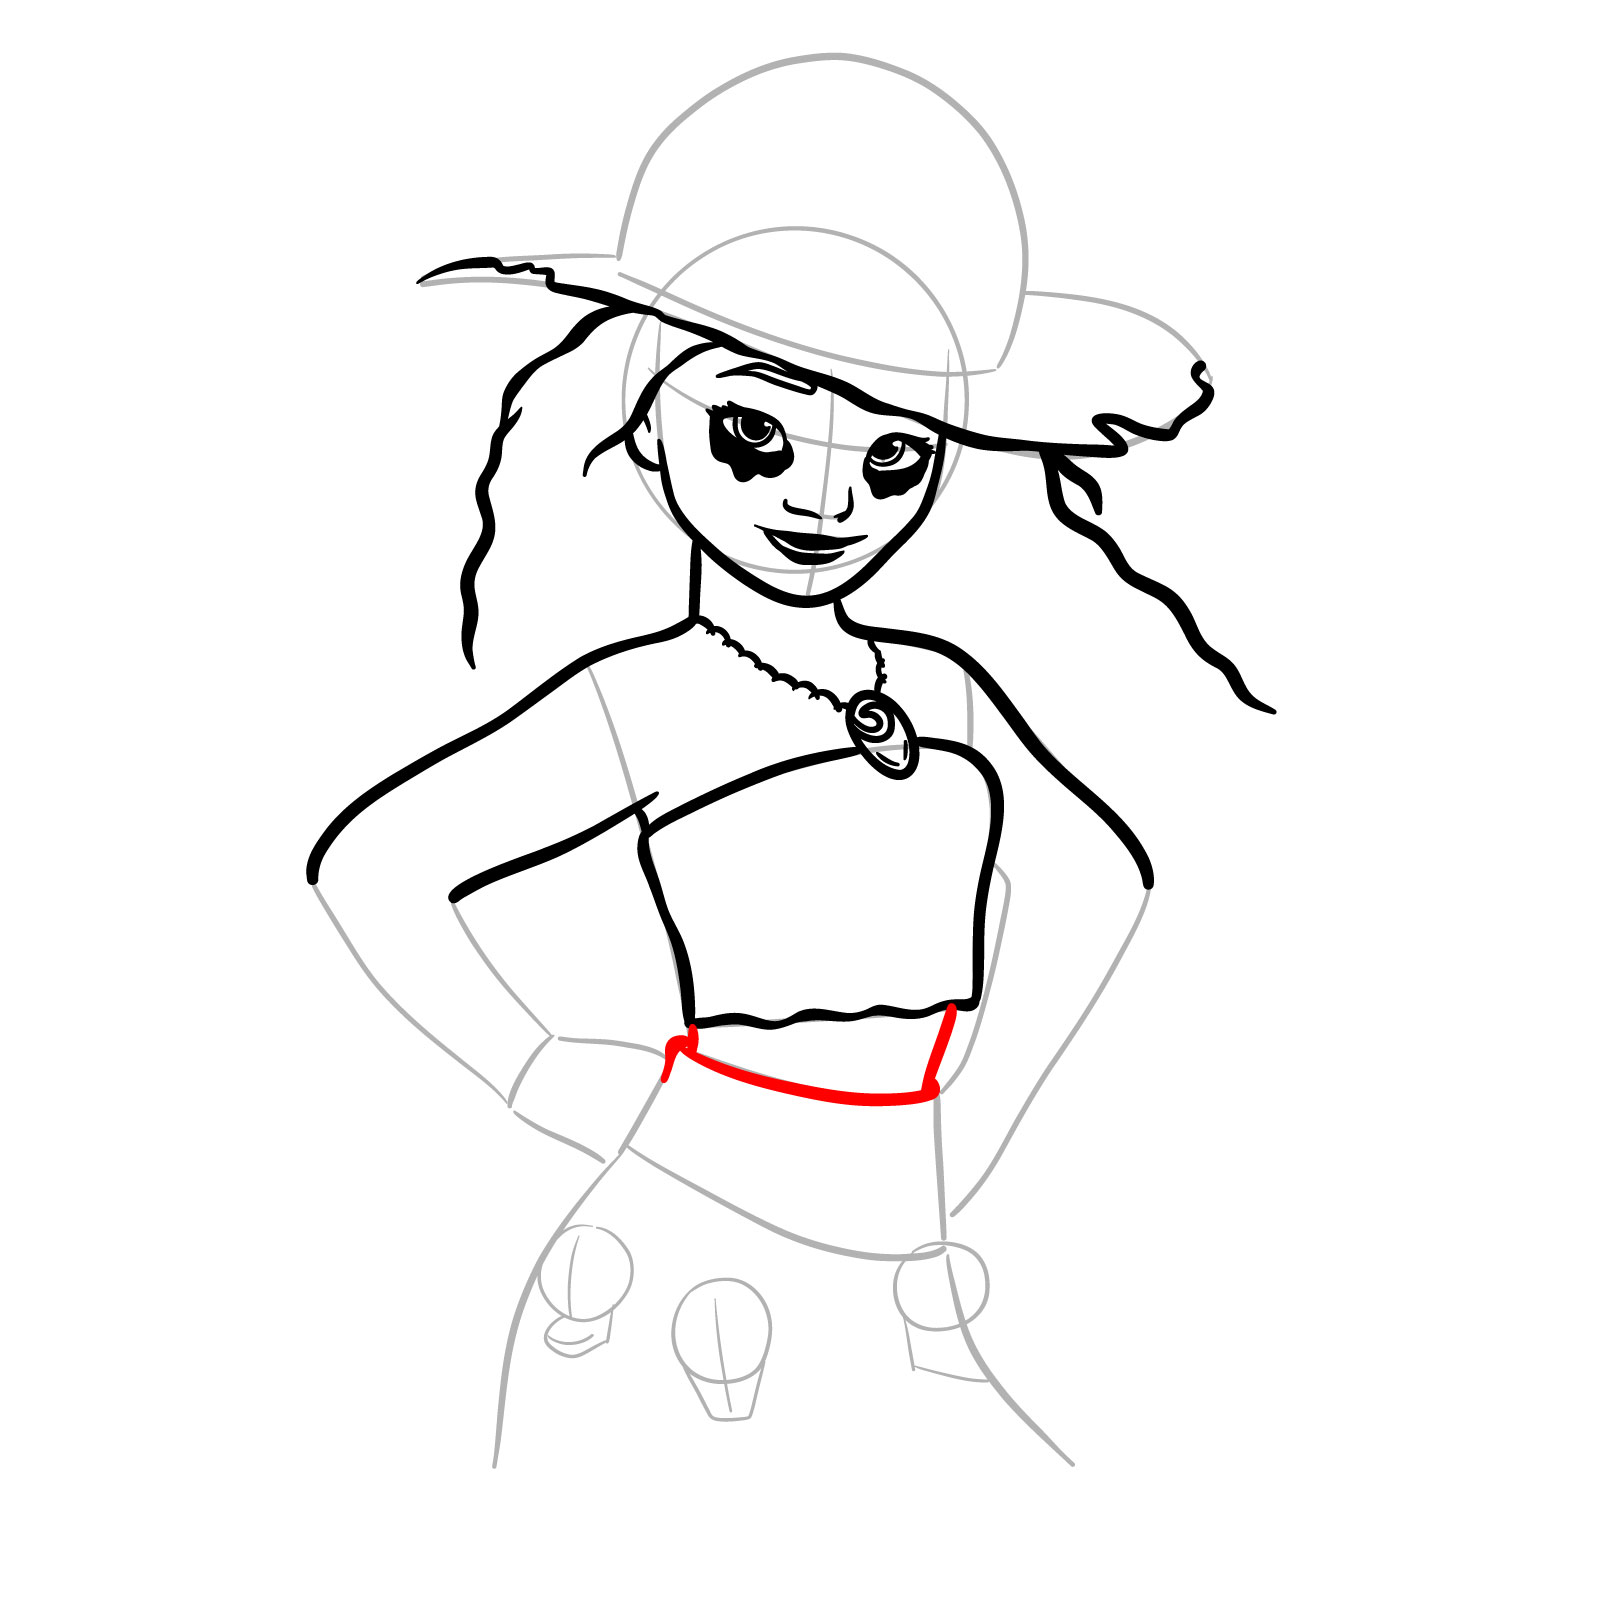 How to Draw Halloween Moana as a Staw Hat Pirate - step 15